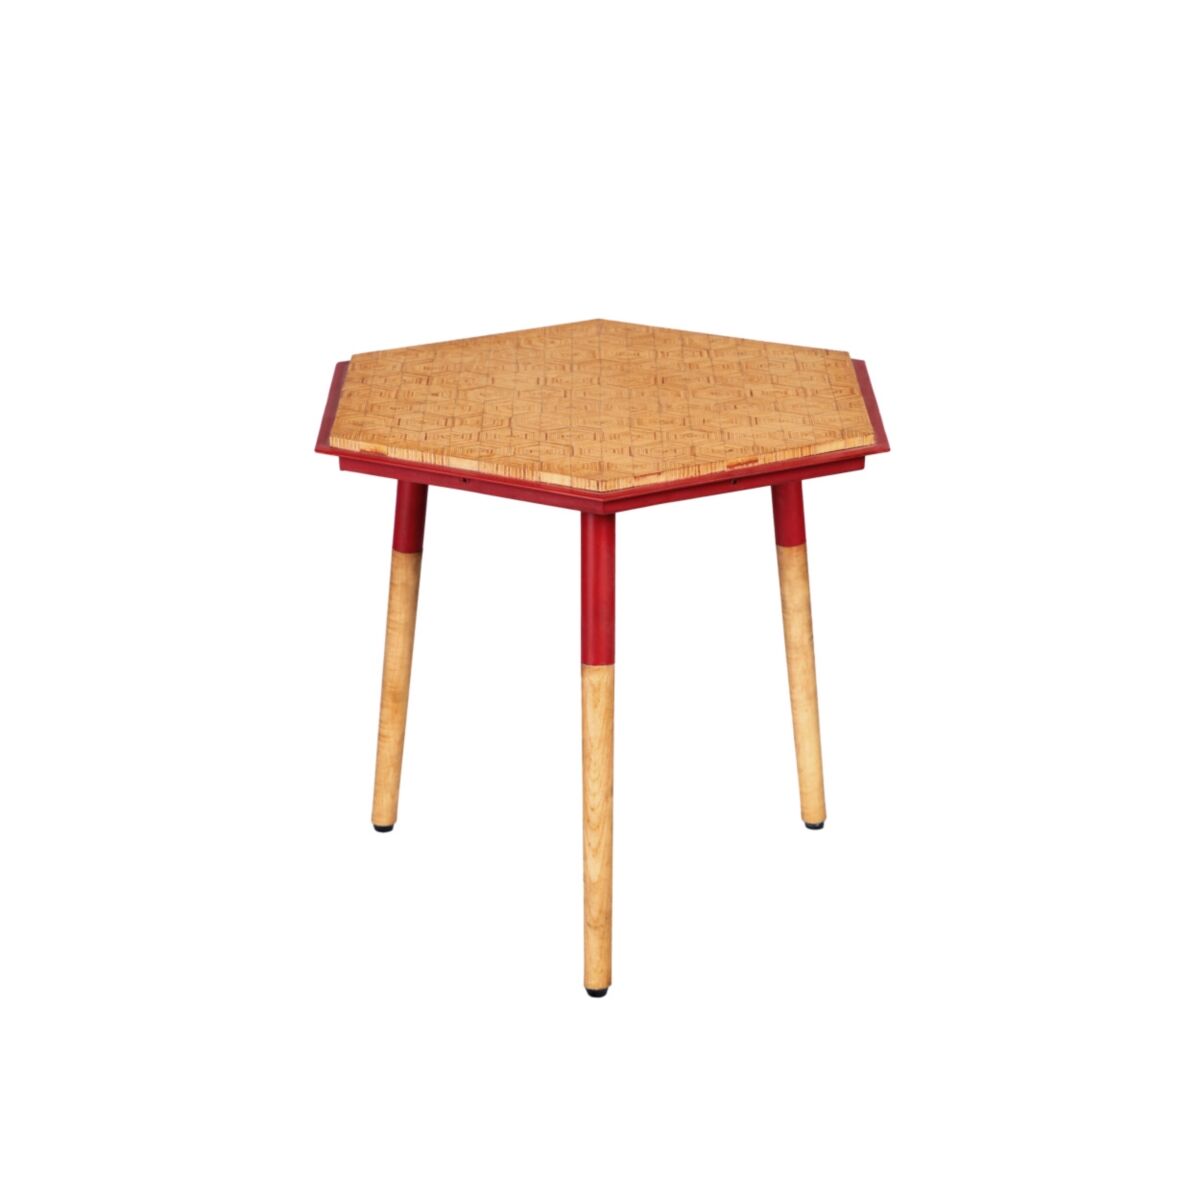 Simplie Fun Paige 18 Inch Hexagon Illusion Wood Side Table, Brown, Red - Brown